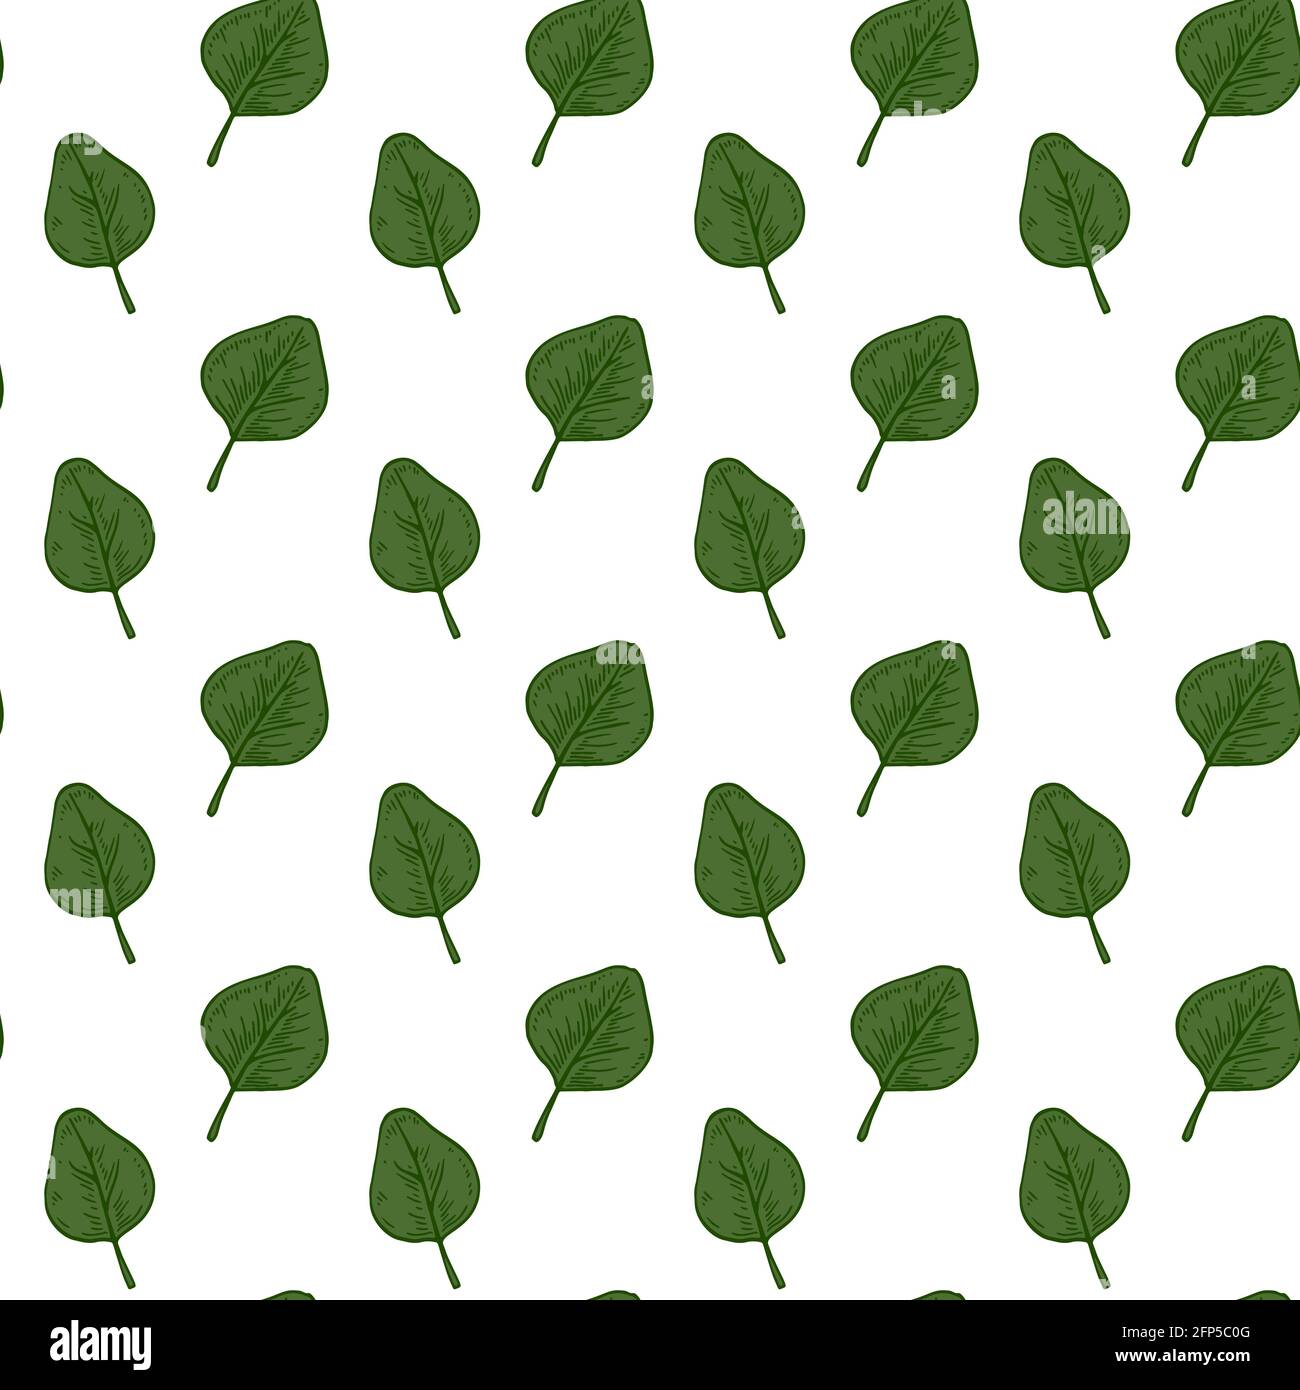 Hand drawn seamless pattern with green eucalyptus leaves isolated on white background. Vector illustration in sketch style Stock Vector